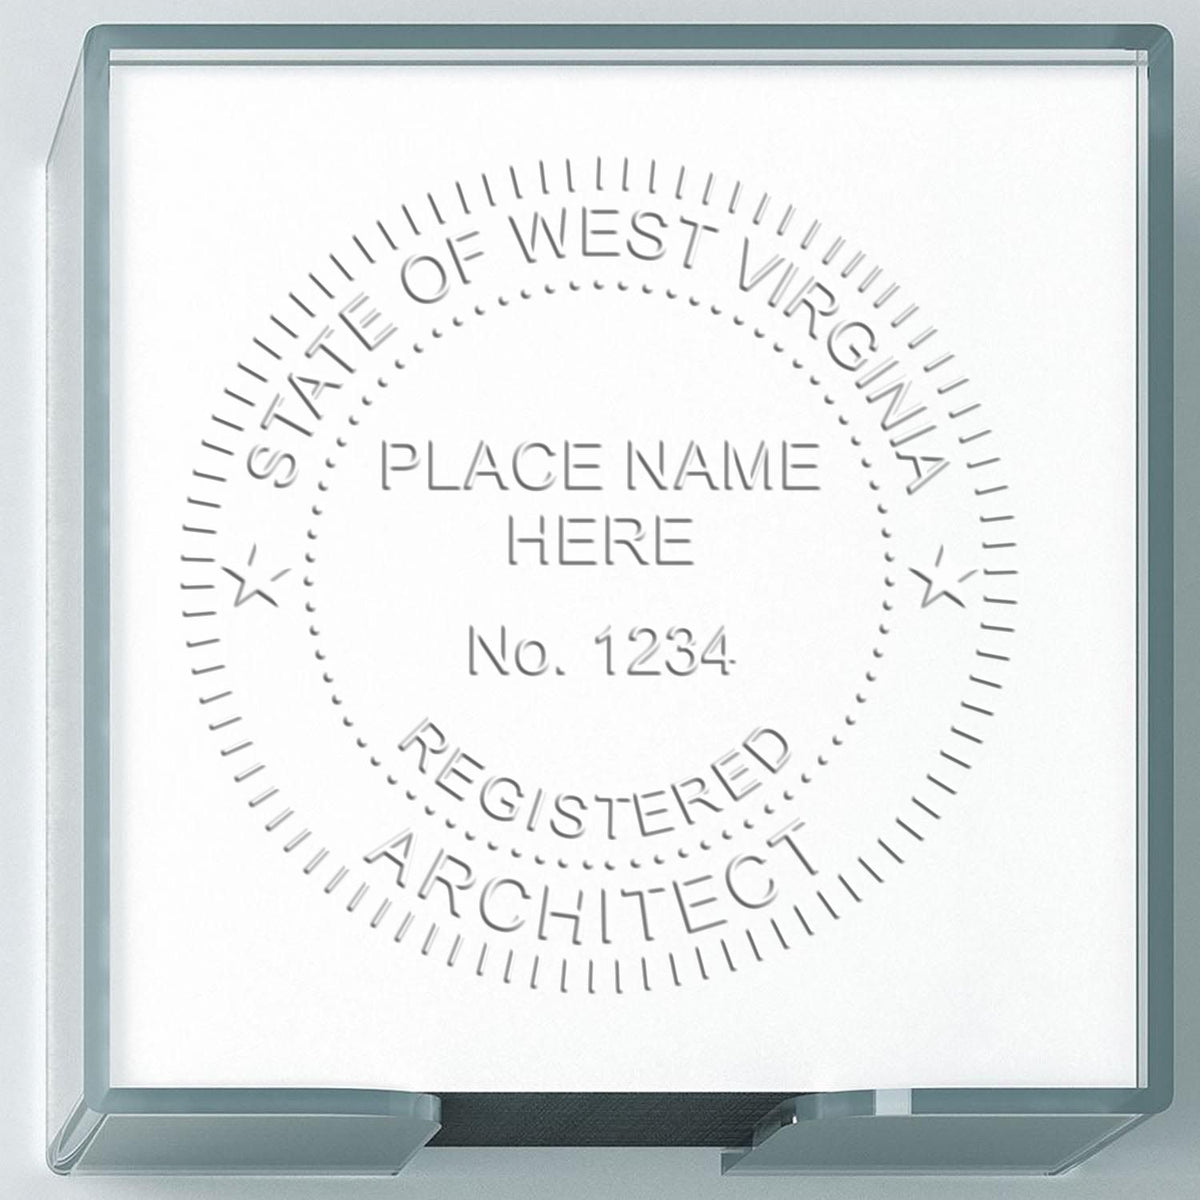 A stamped imprint of the Gift West Virginia Architect Seal in this stylish lifestyle photo, setting the tone for a unique and personalized product.